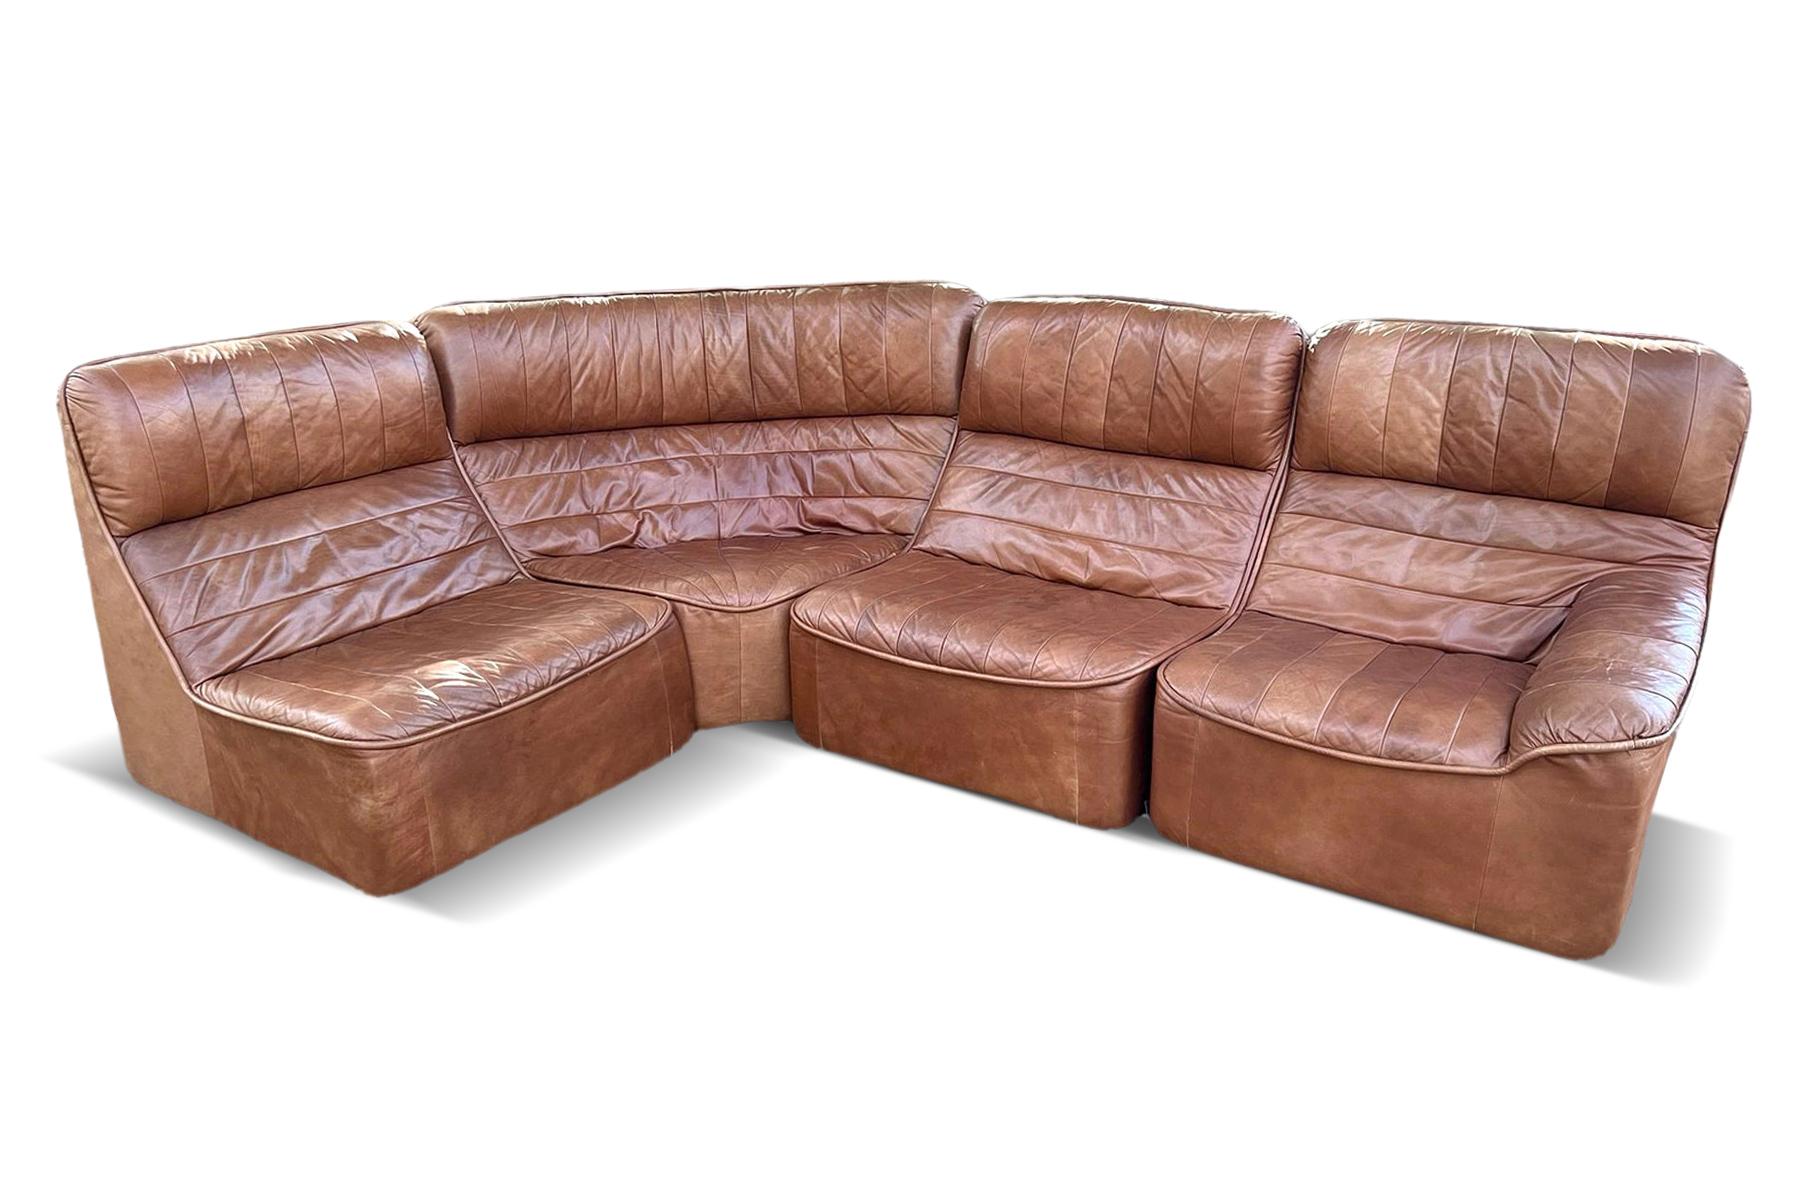 1970s Modular Leather Sofa in Cognac Leather In Good Condition For Sale In Berkeley, CA